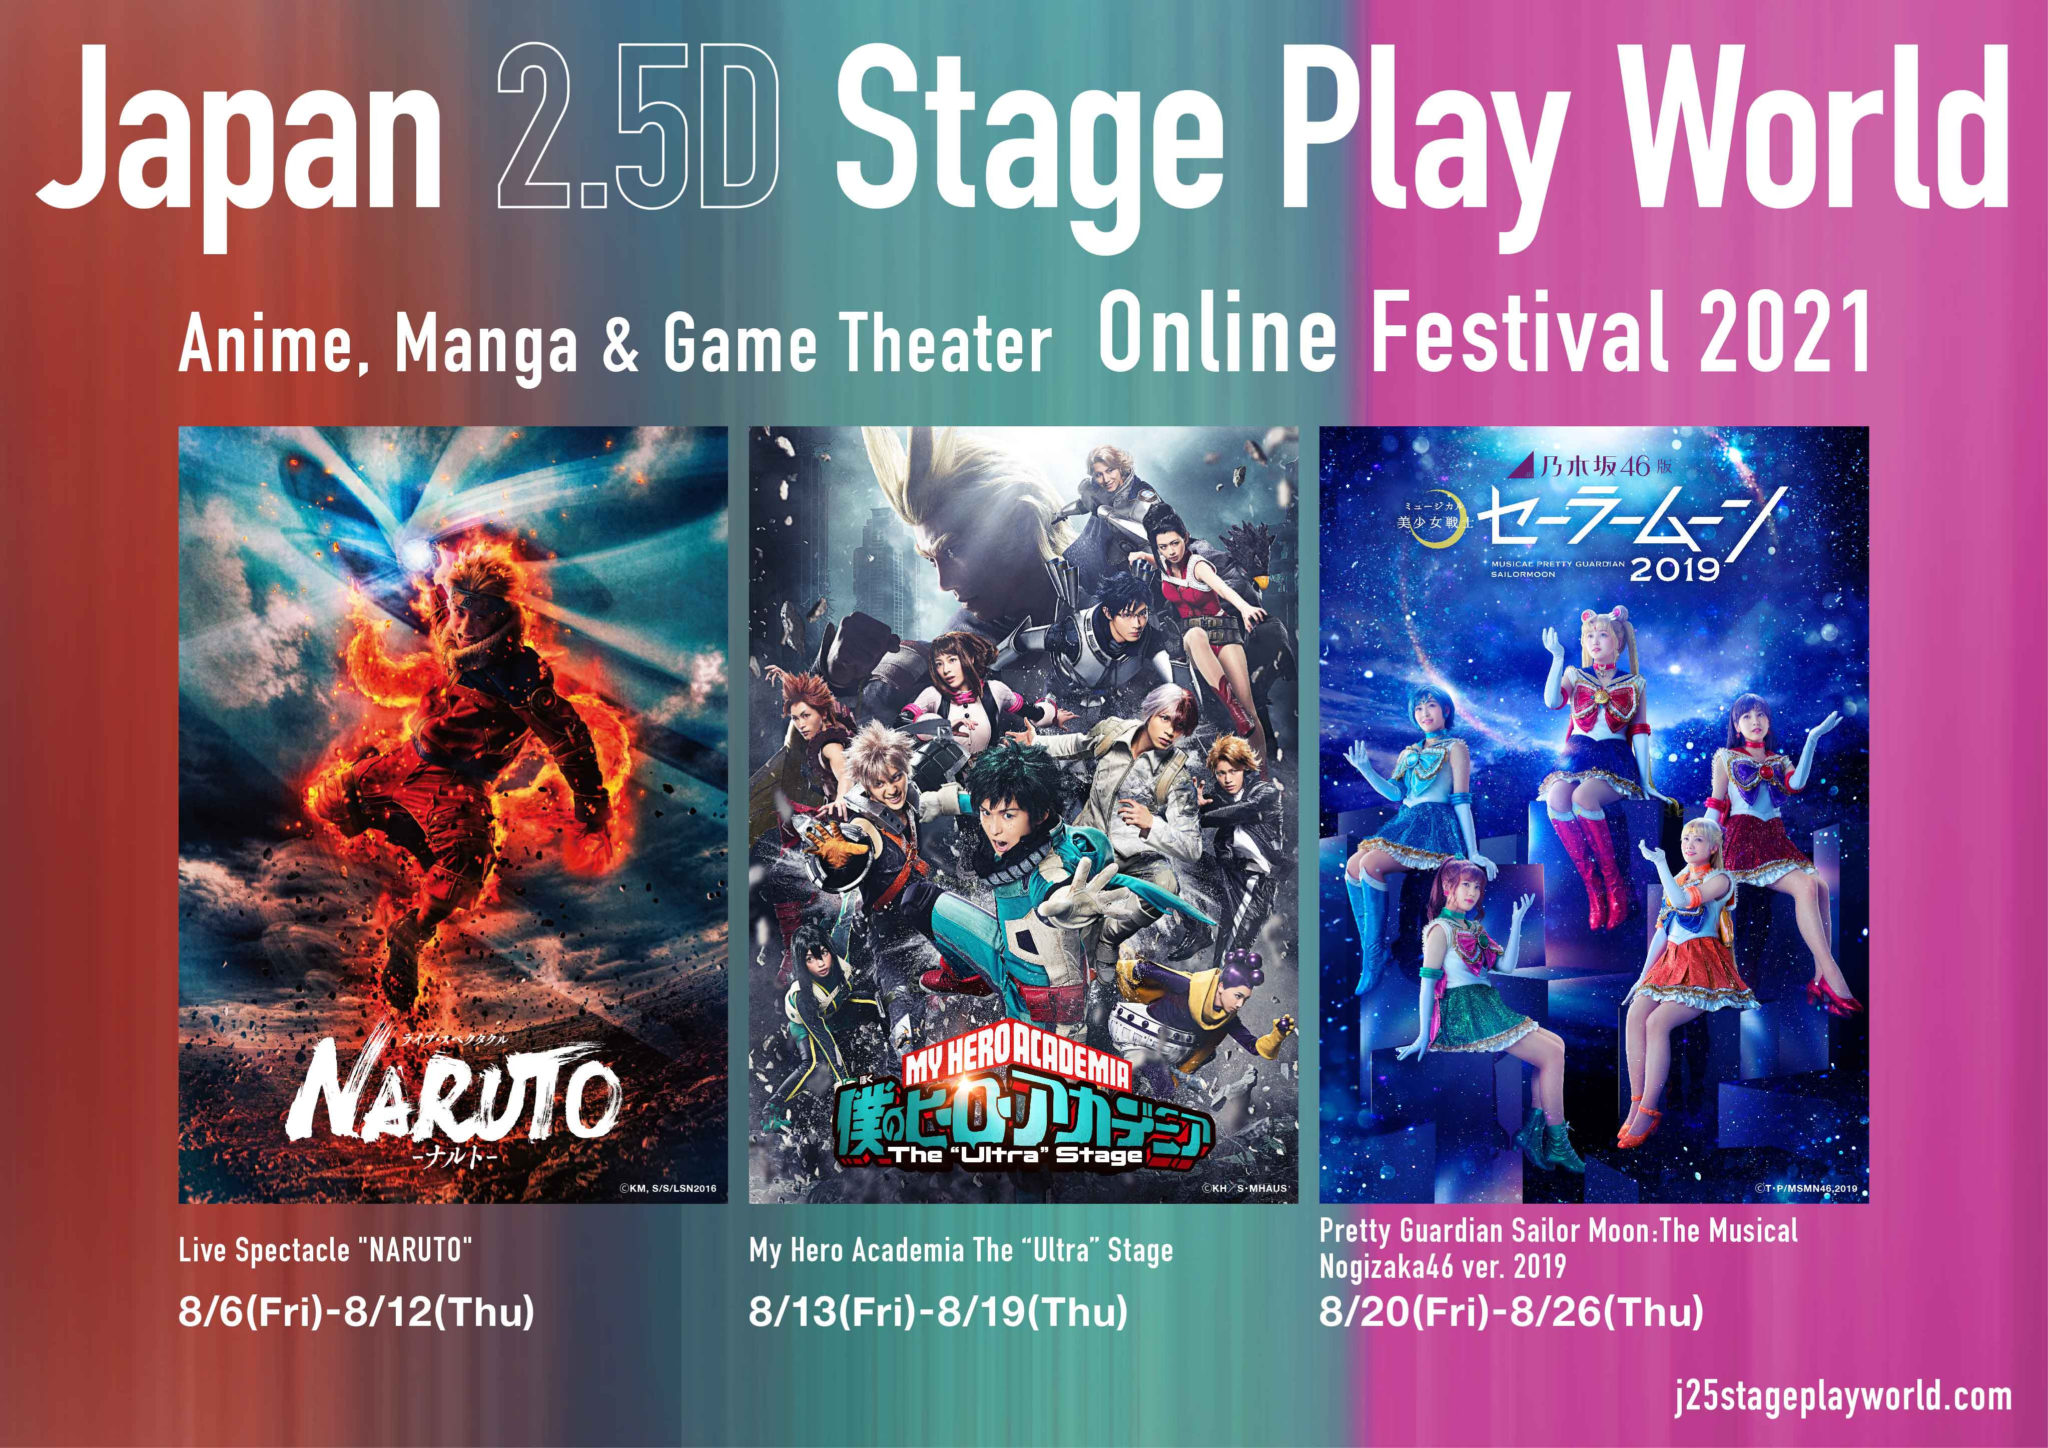 Japan 2.5D Stage Play World: Anime, Manga & Game Theater Online Festival 2021